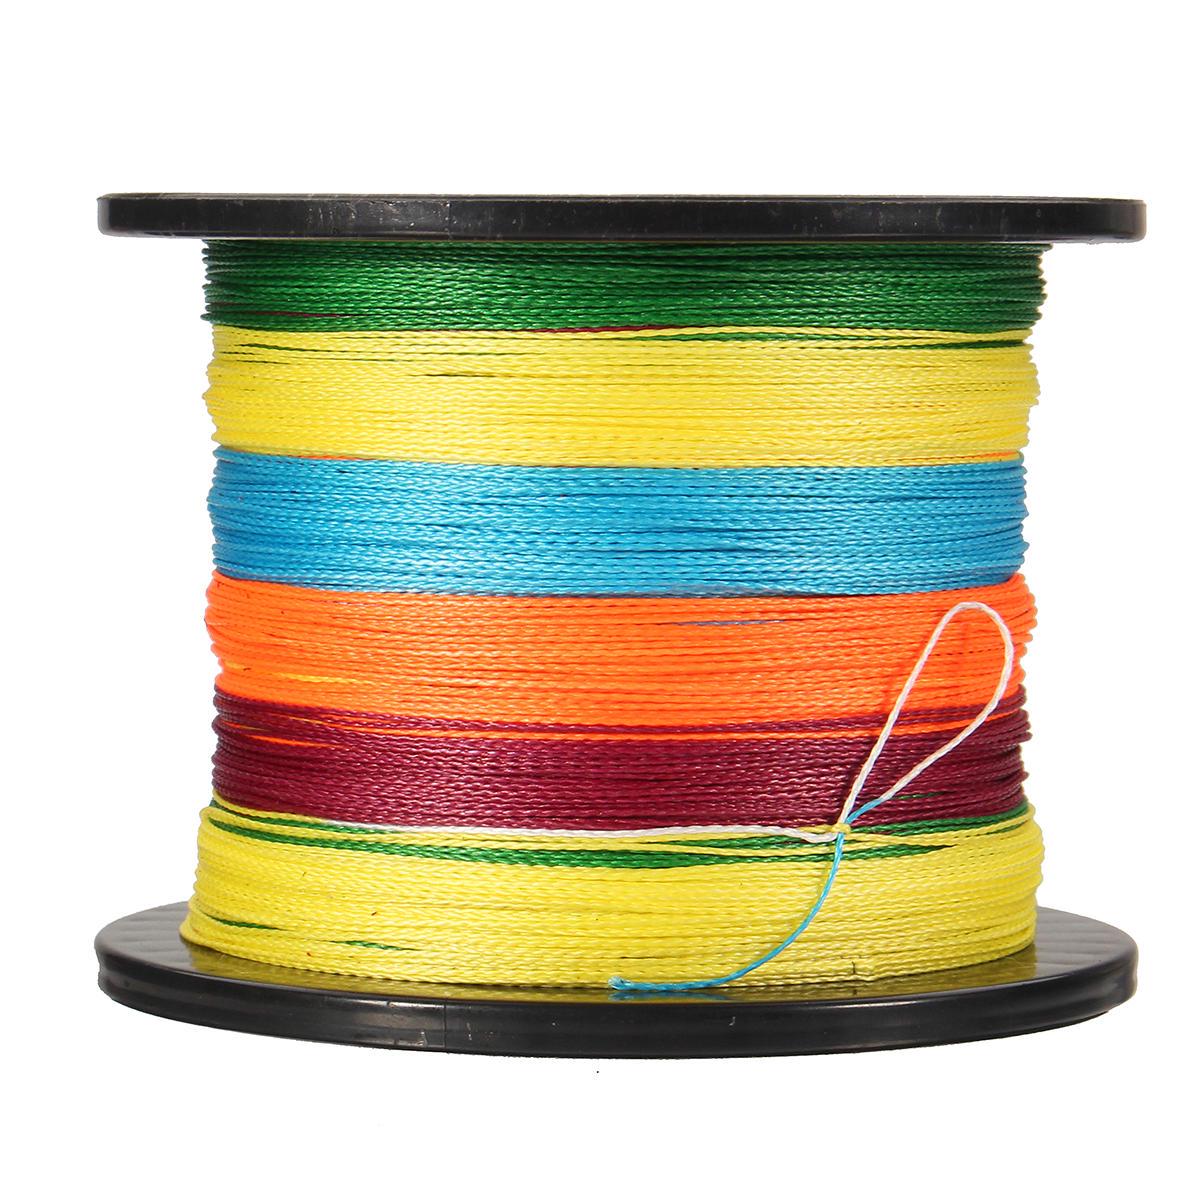 Zanlure Multicolor 547 Yards 500M 12-72LB 4 Strands PE Braided Fishing Line Wire Outdoor Sea Fishing Tackle